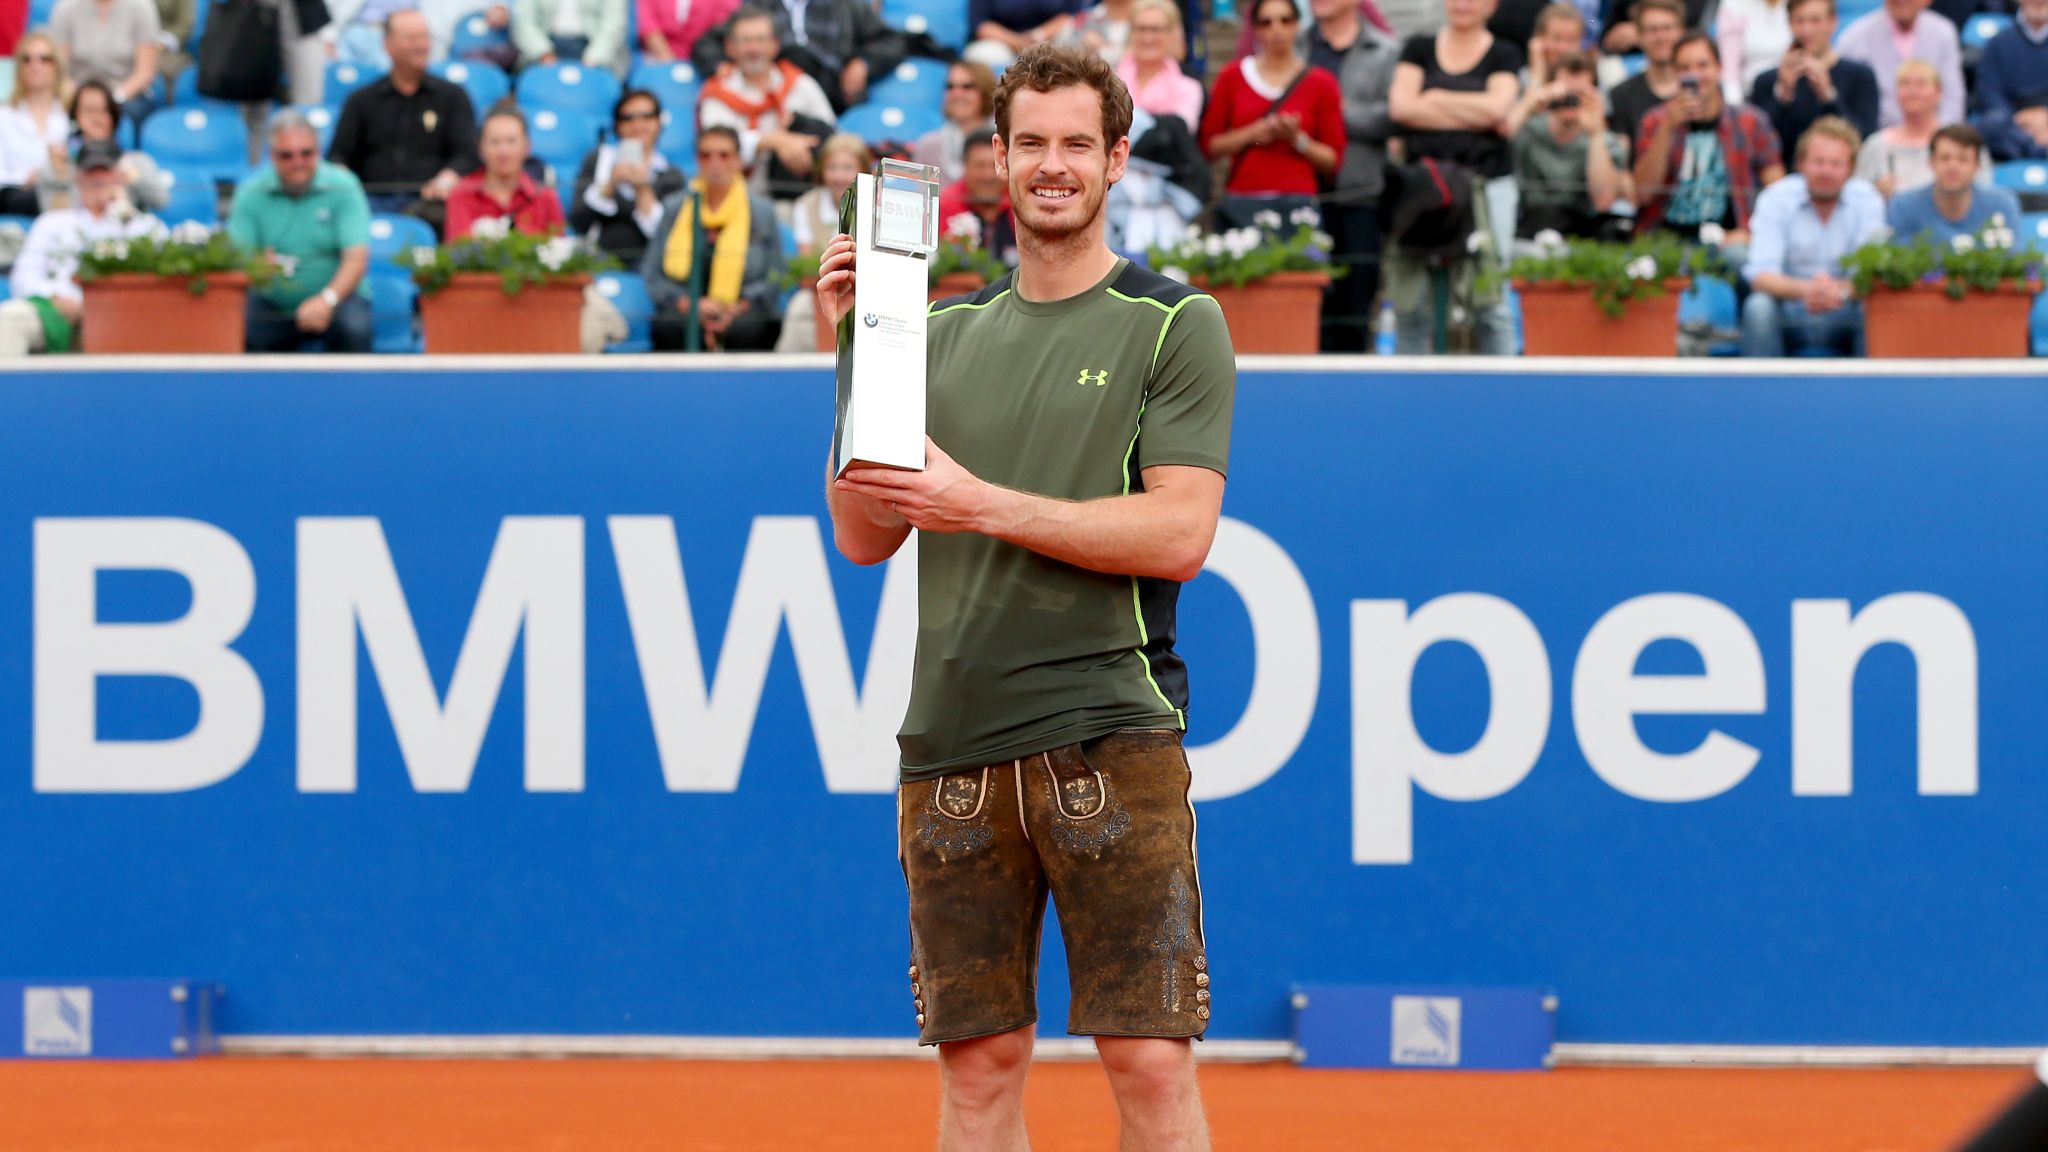 Andy Murray wins first clay court title at BMW Open in Munich Tennis